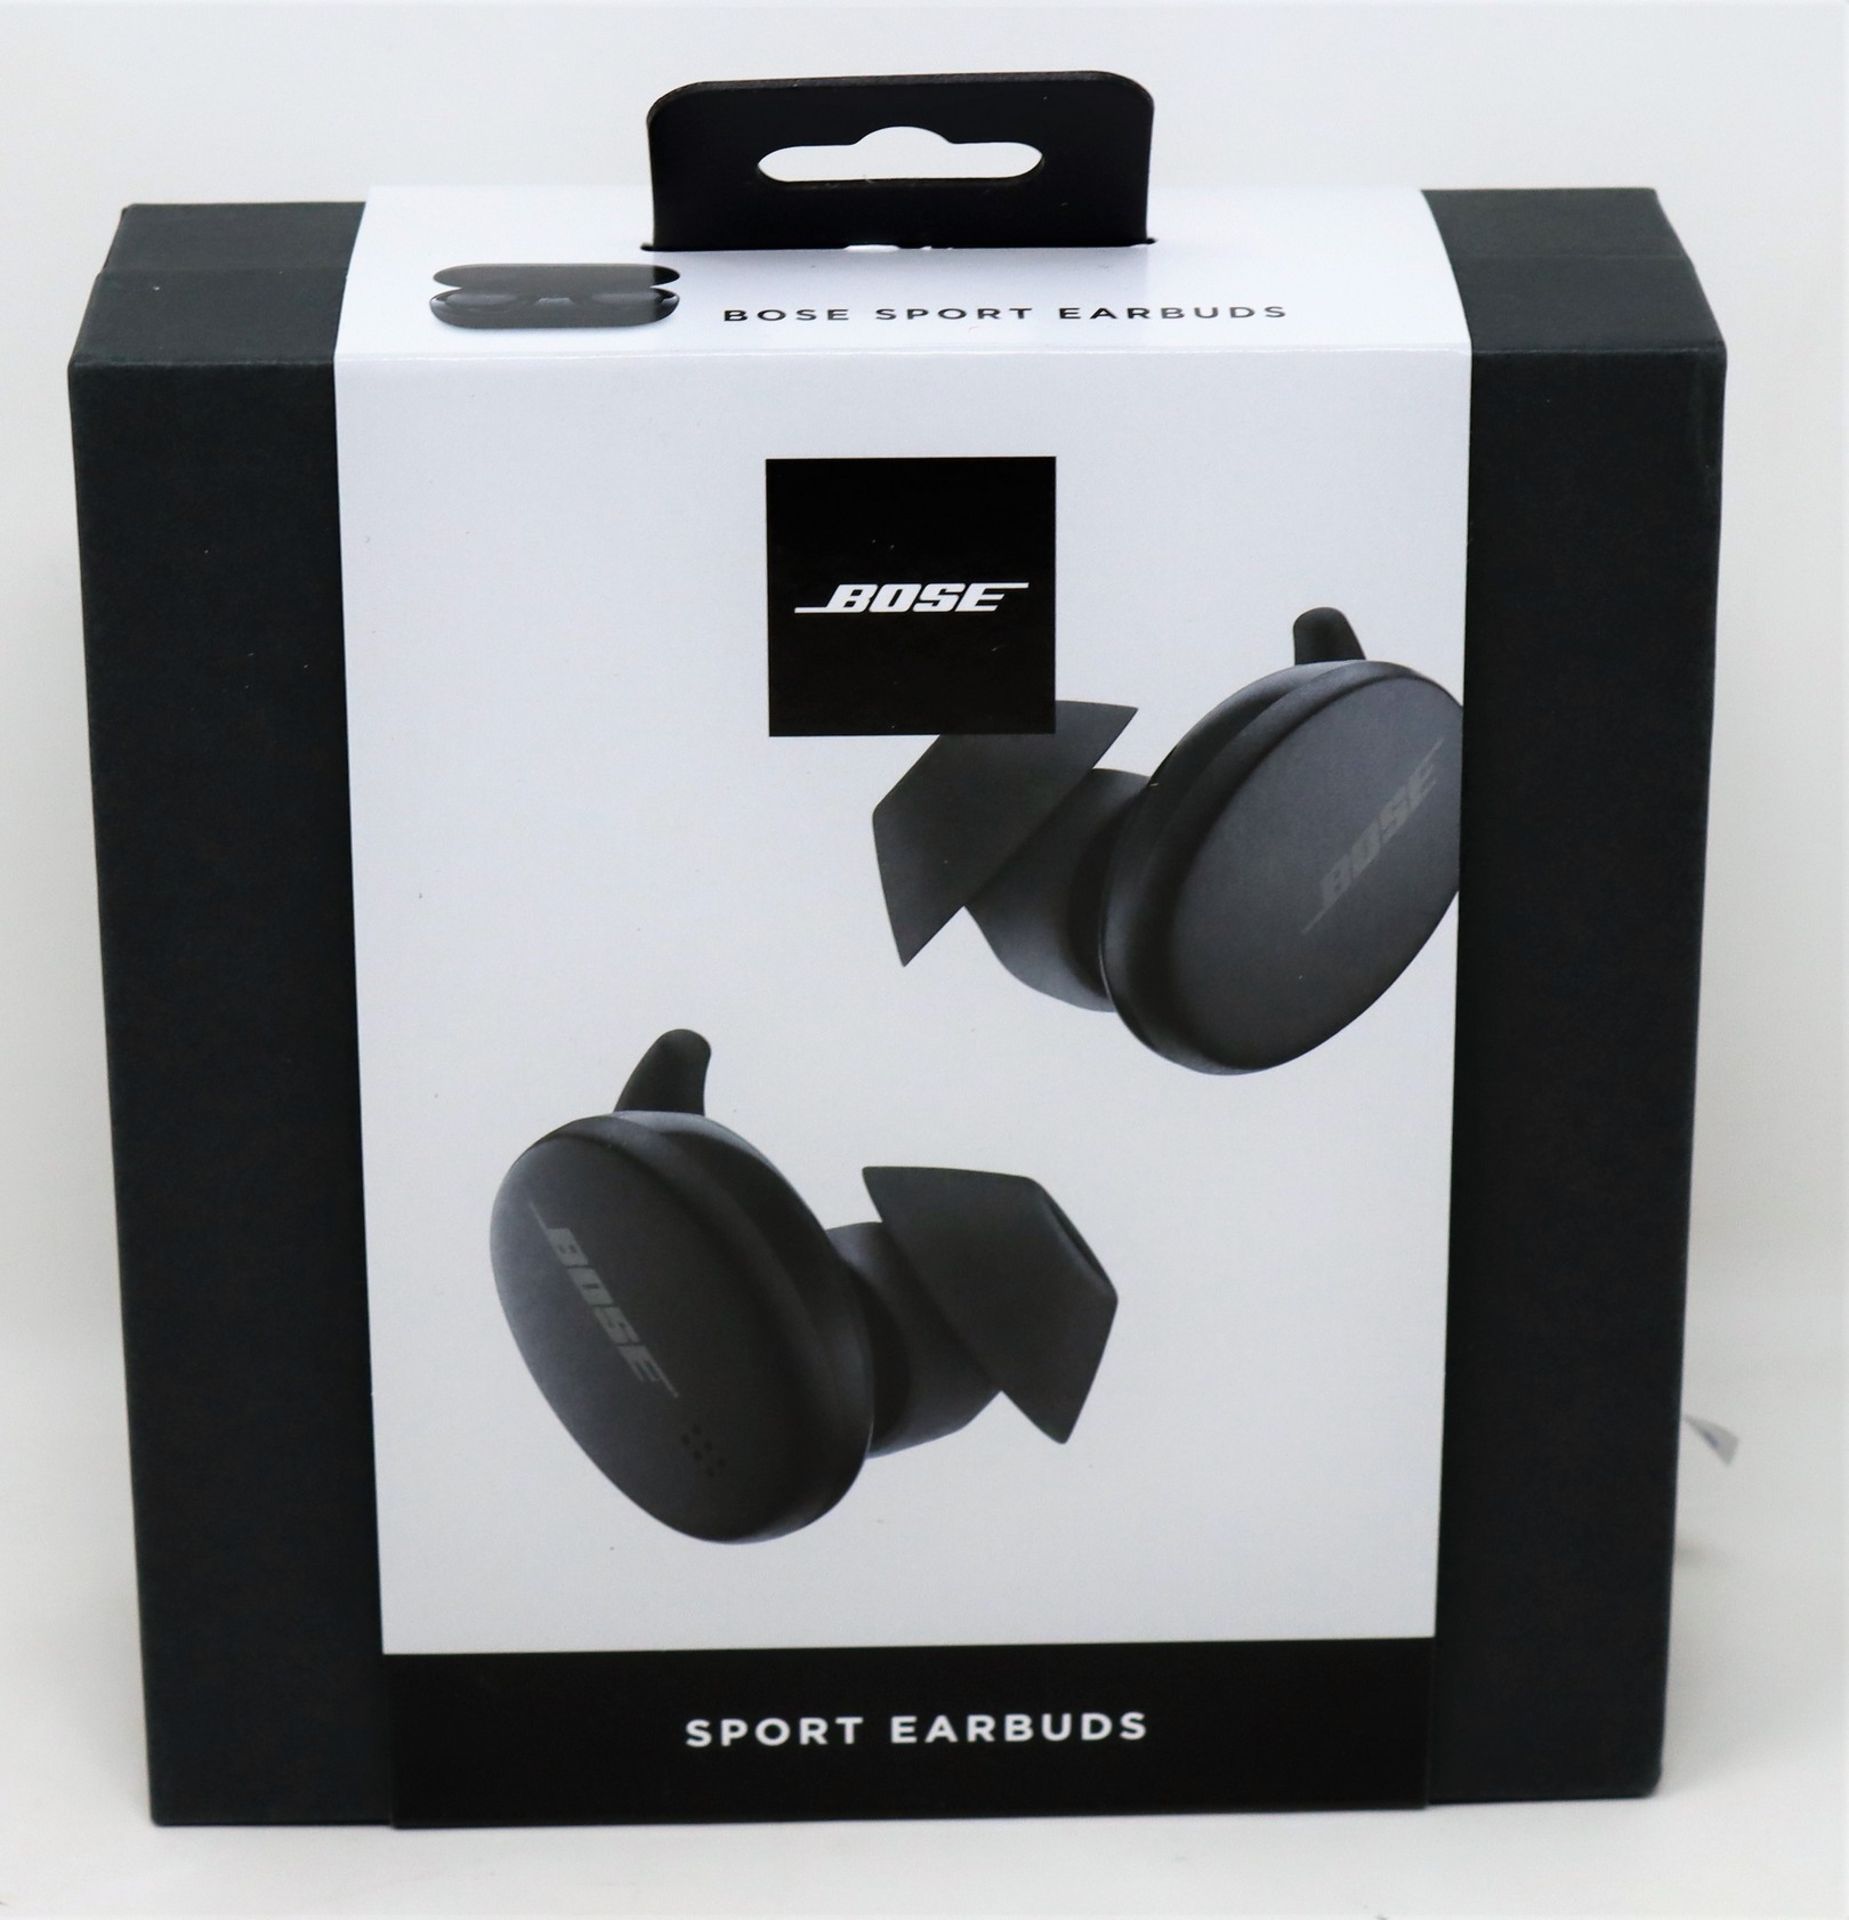 A boxed as new pair of Bose Sport Earbuds in Black (Box sealed).